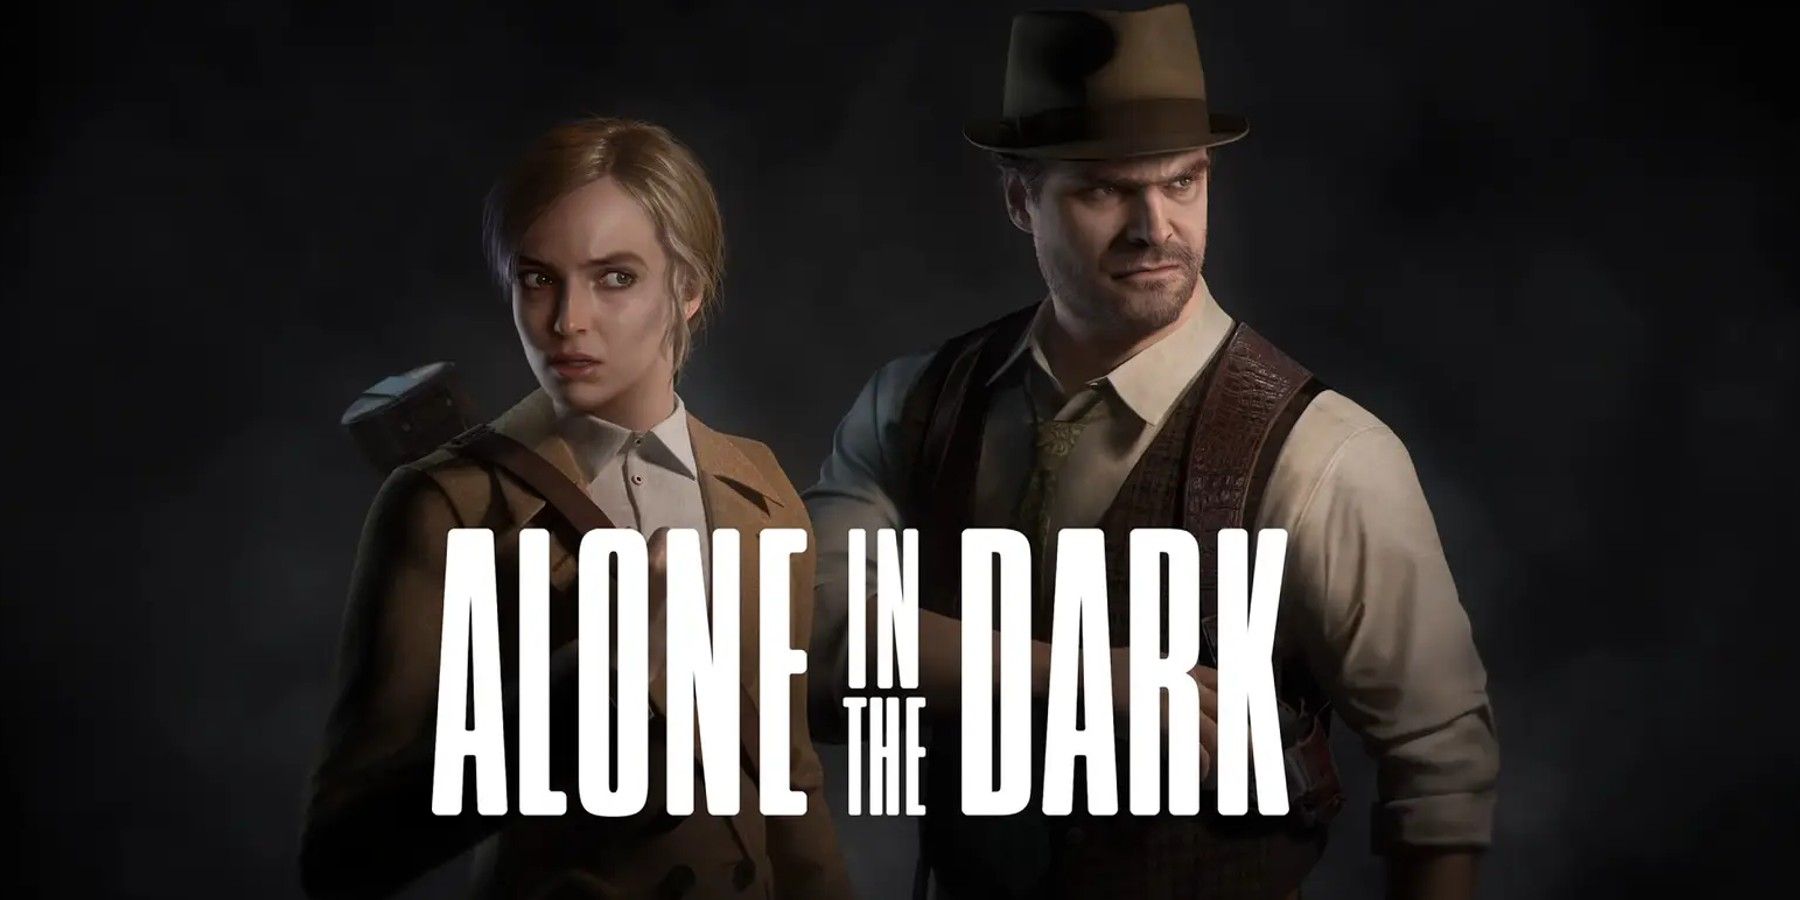 Alone In The Dark promo art showing Jodie Comer and David Harbour's characters.